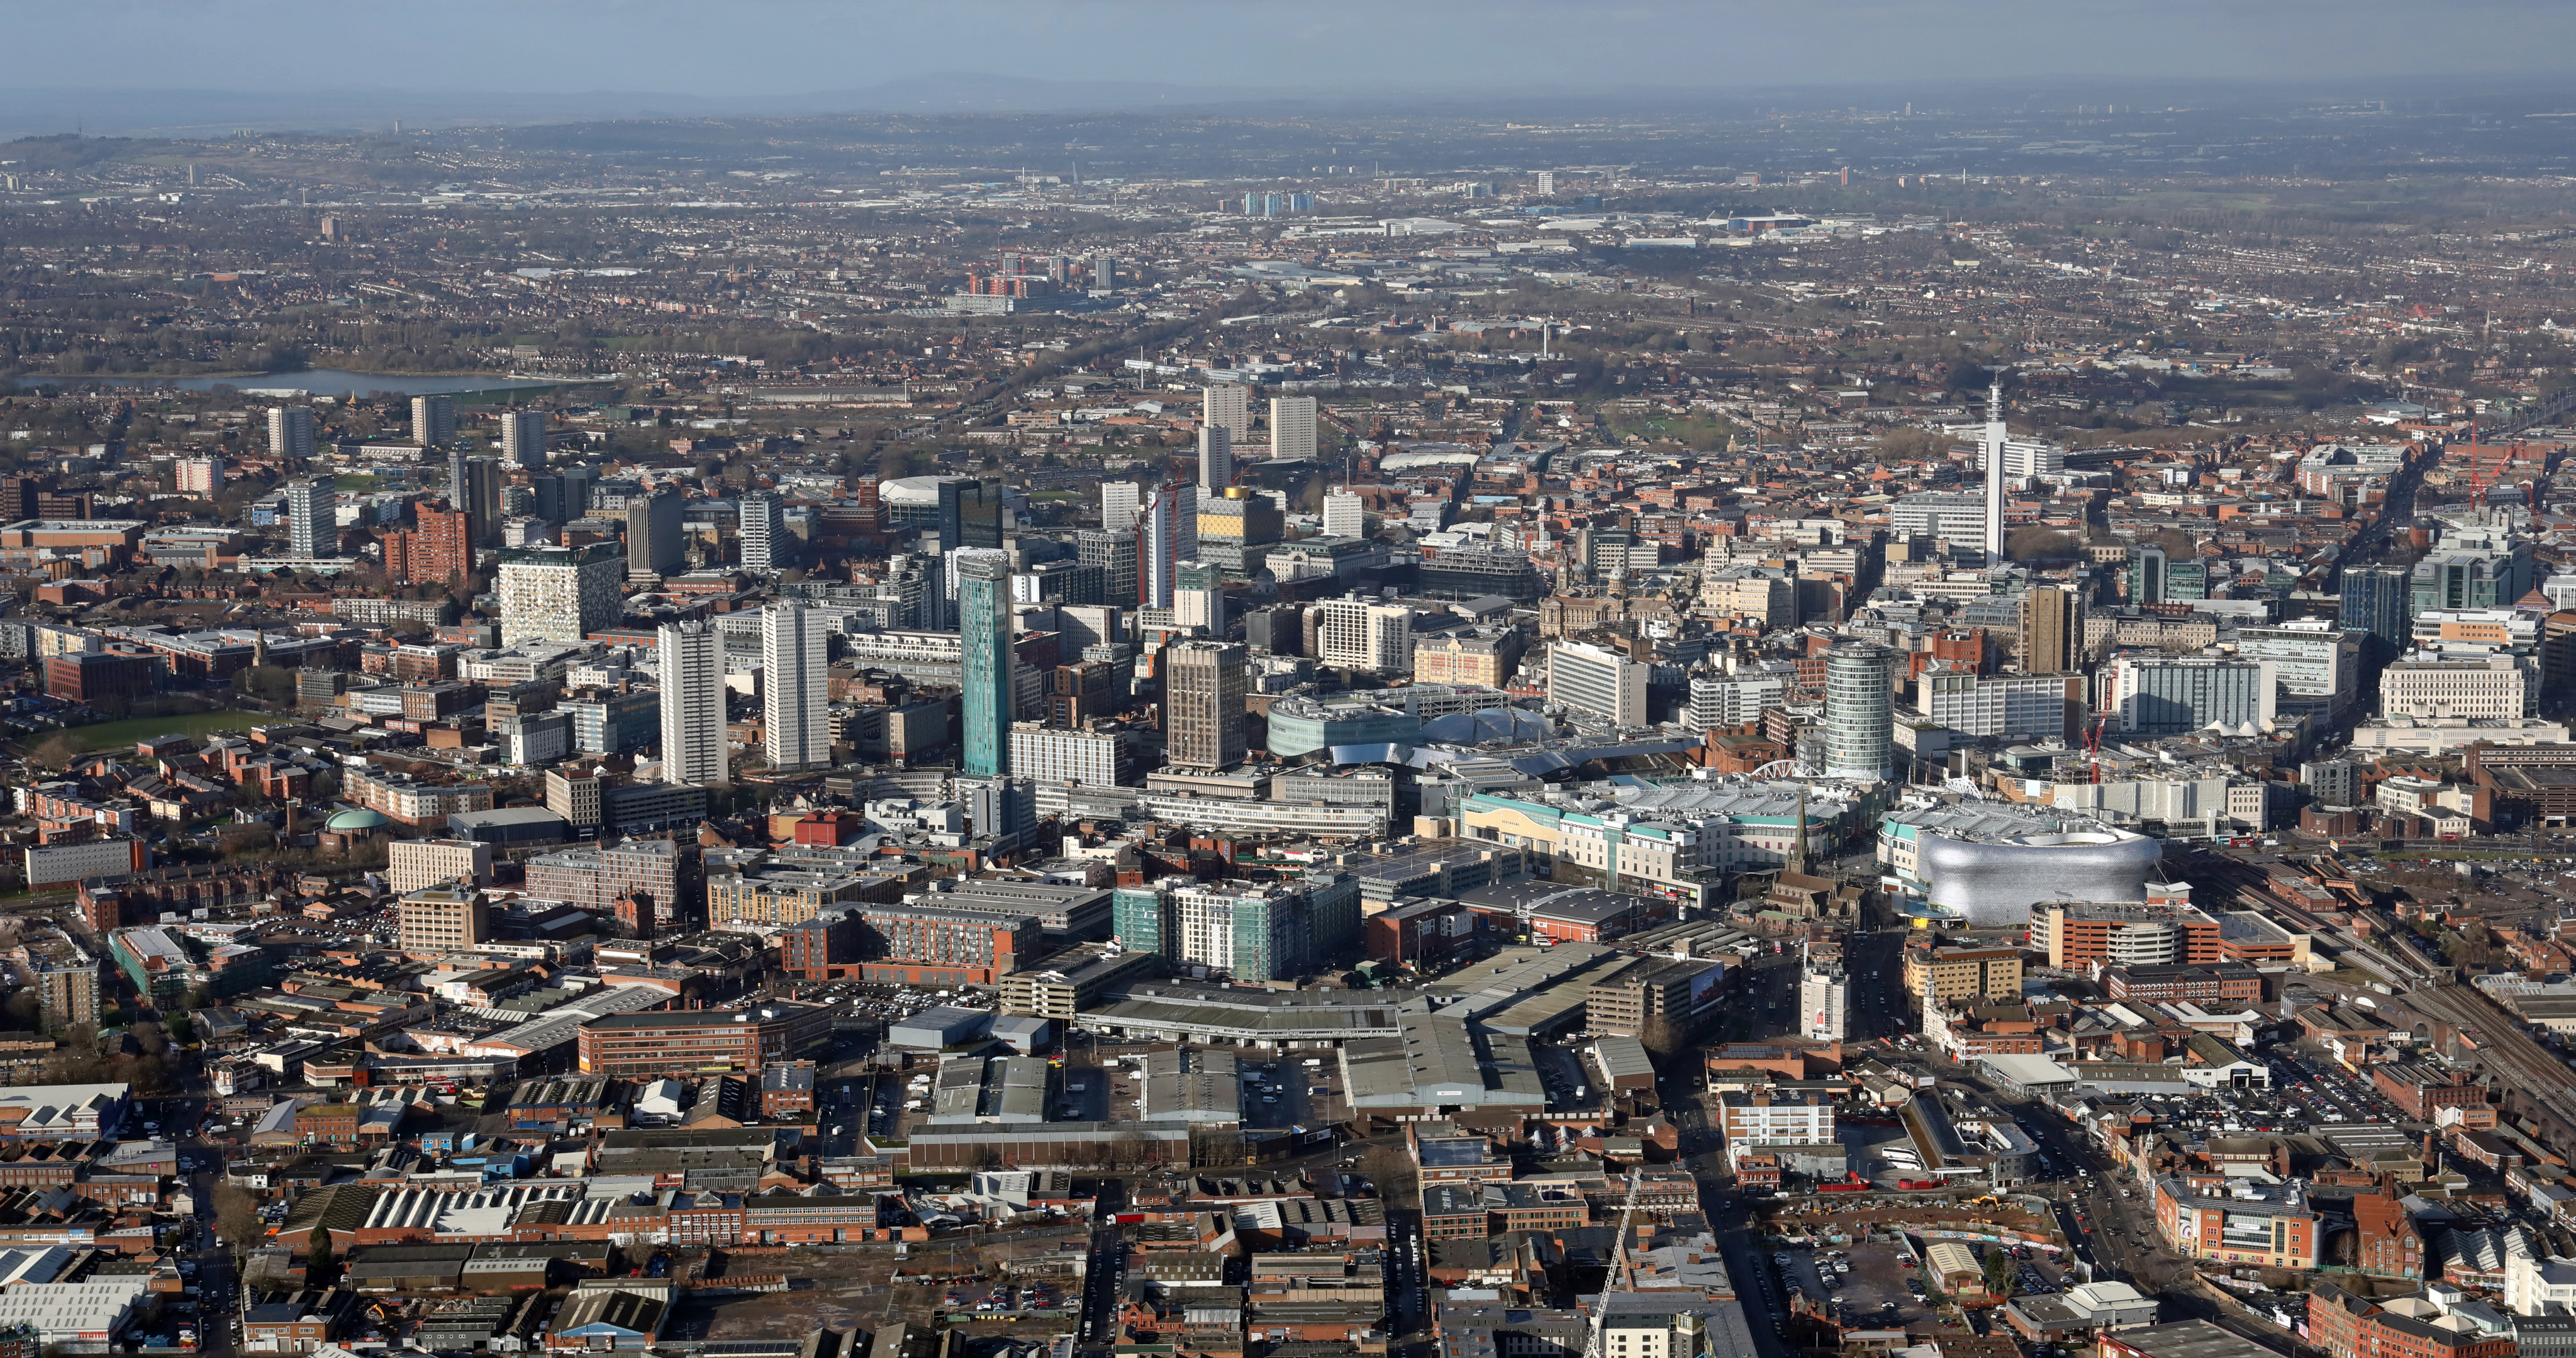 Birmingham, home to some 1.1 million people, is the second largest city in the UK after London. Photo: Shutterstock